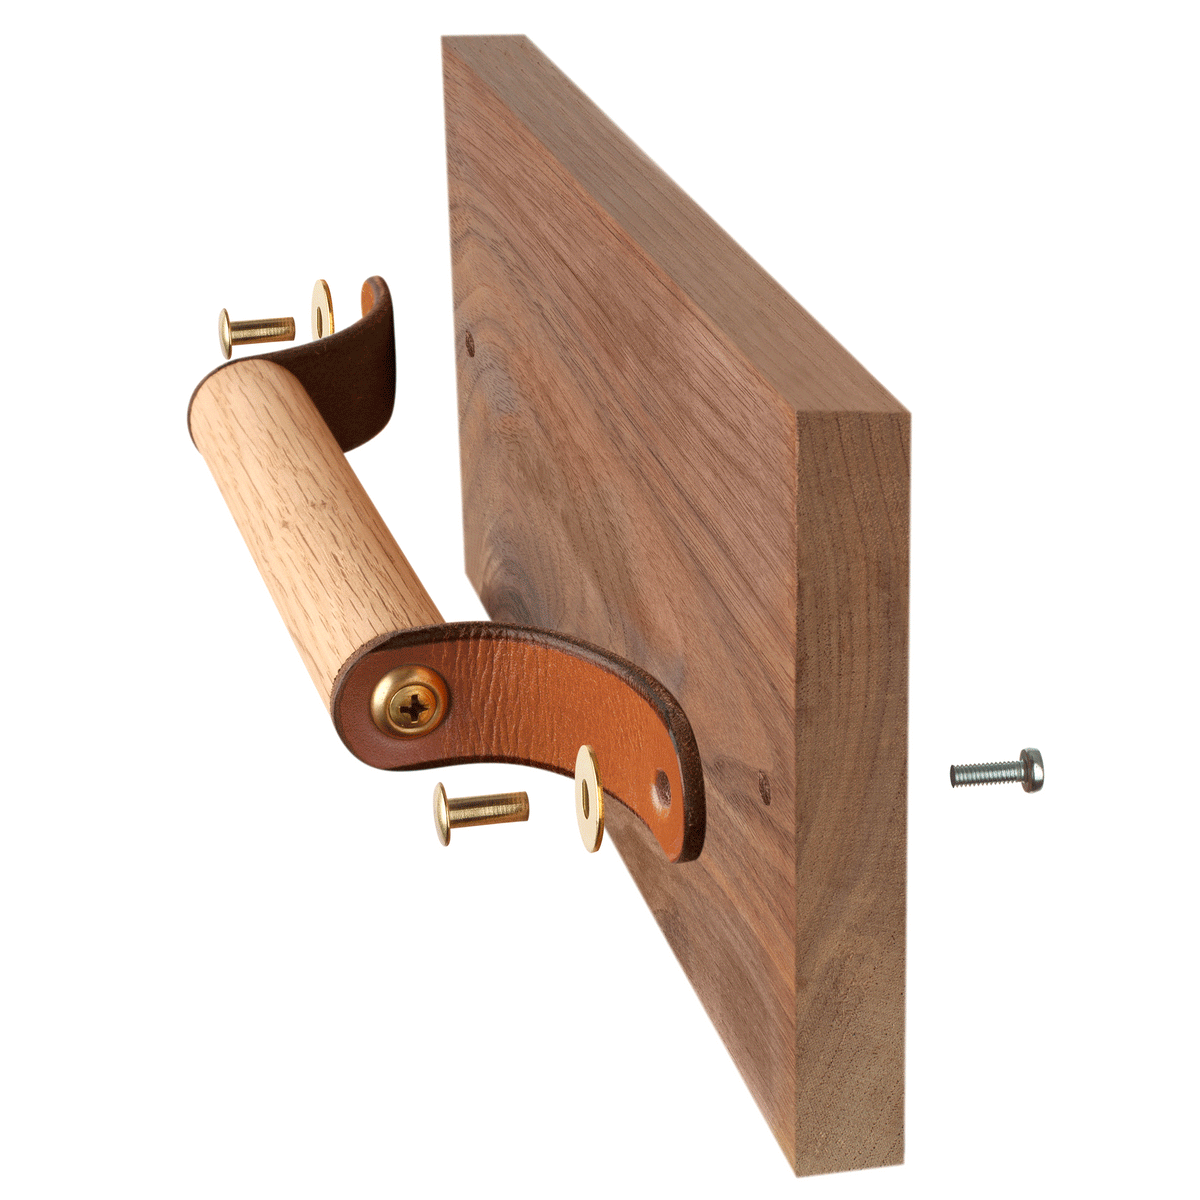 White background image showing how the Sellwood wood and leather handle is installed on a drawer surface. Holes are drilled through the wood, and the surfaceness head comes in the front, threaded screws on the back.